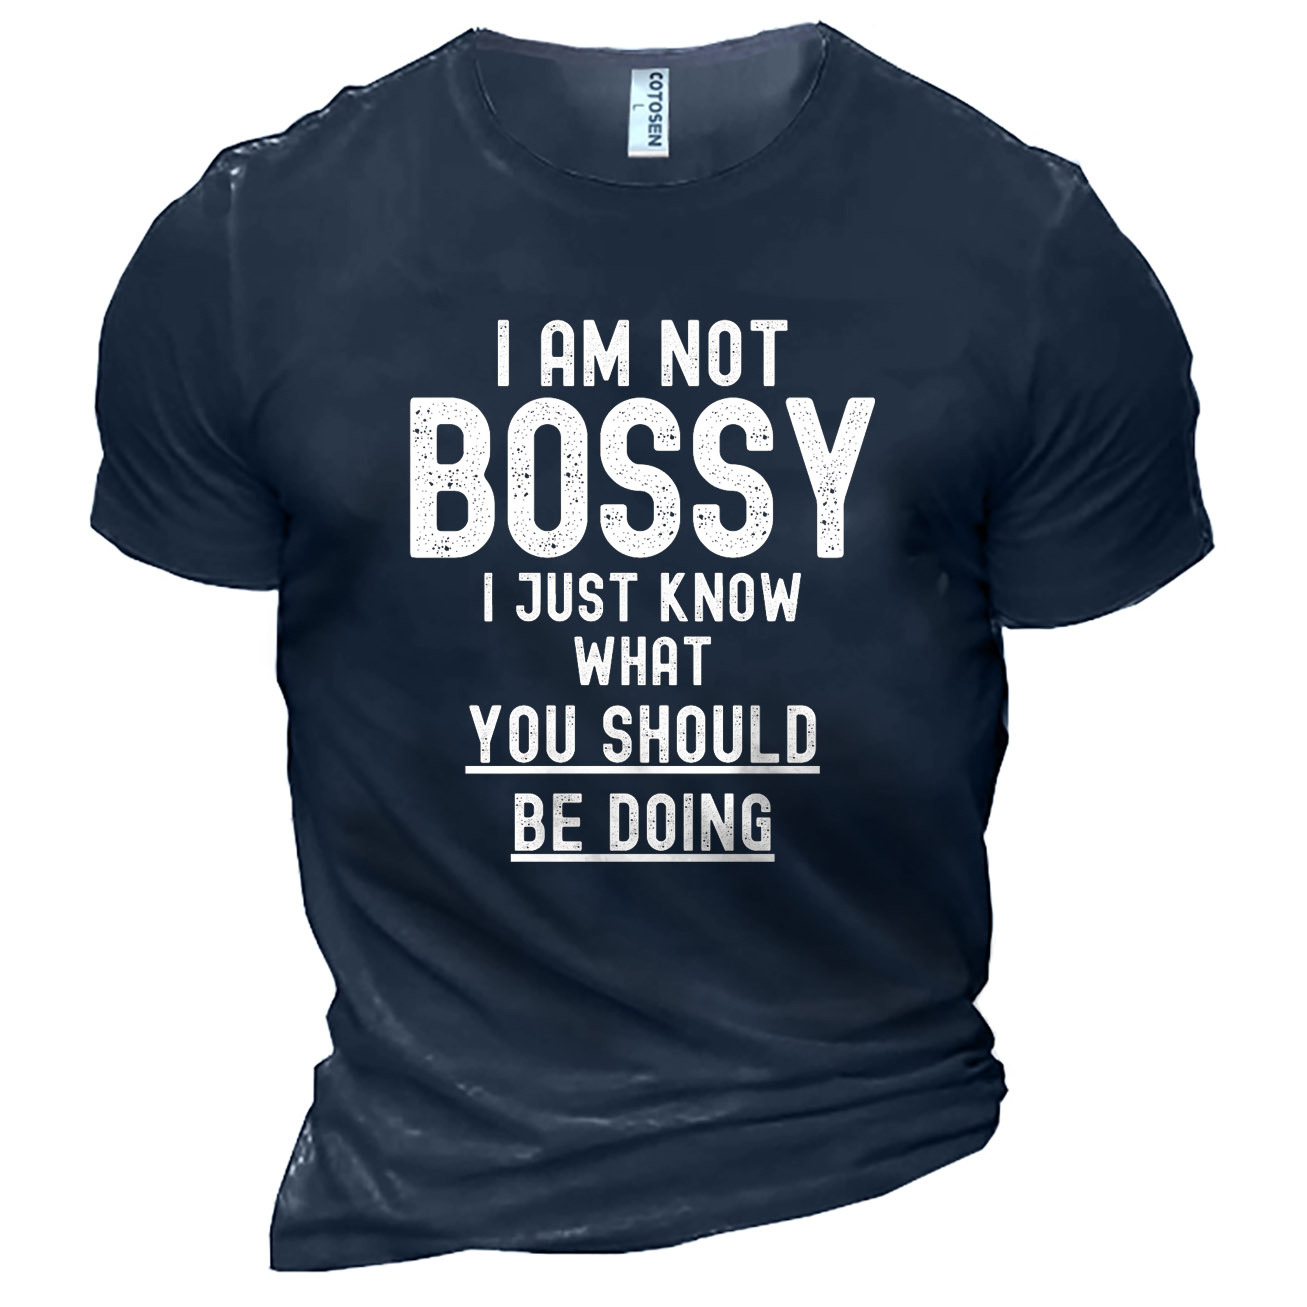 Men's I Am Not Chic Bossy I Just Know What You Should Be Doing Cotton T-shirt